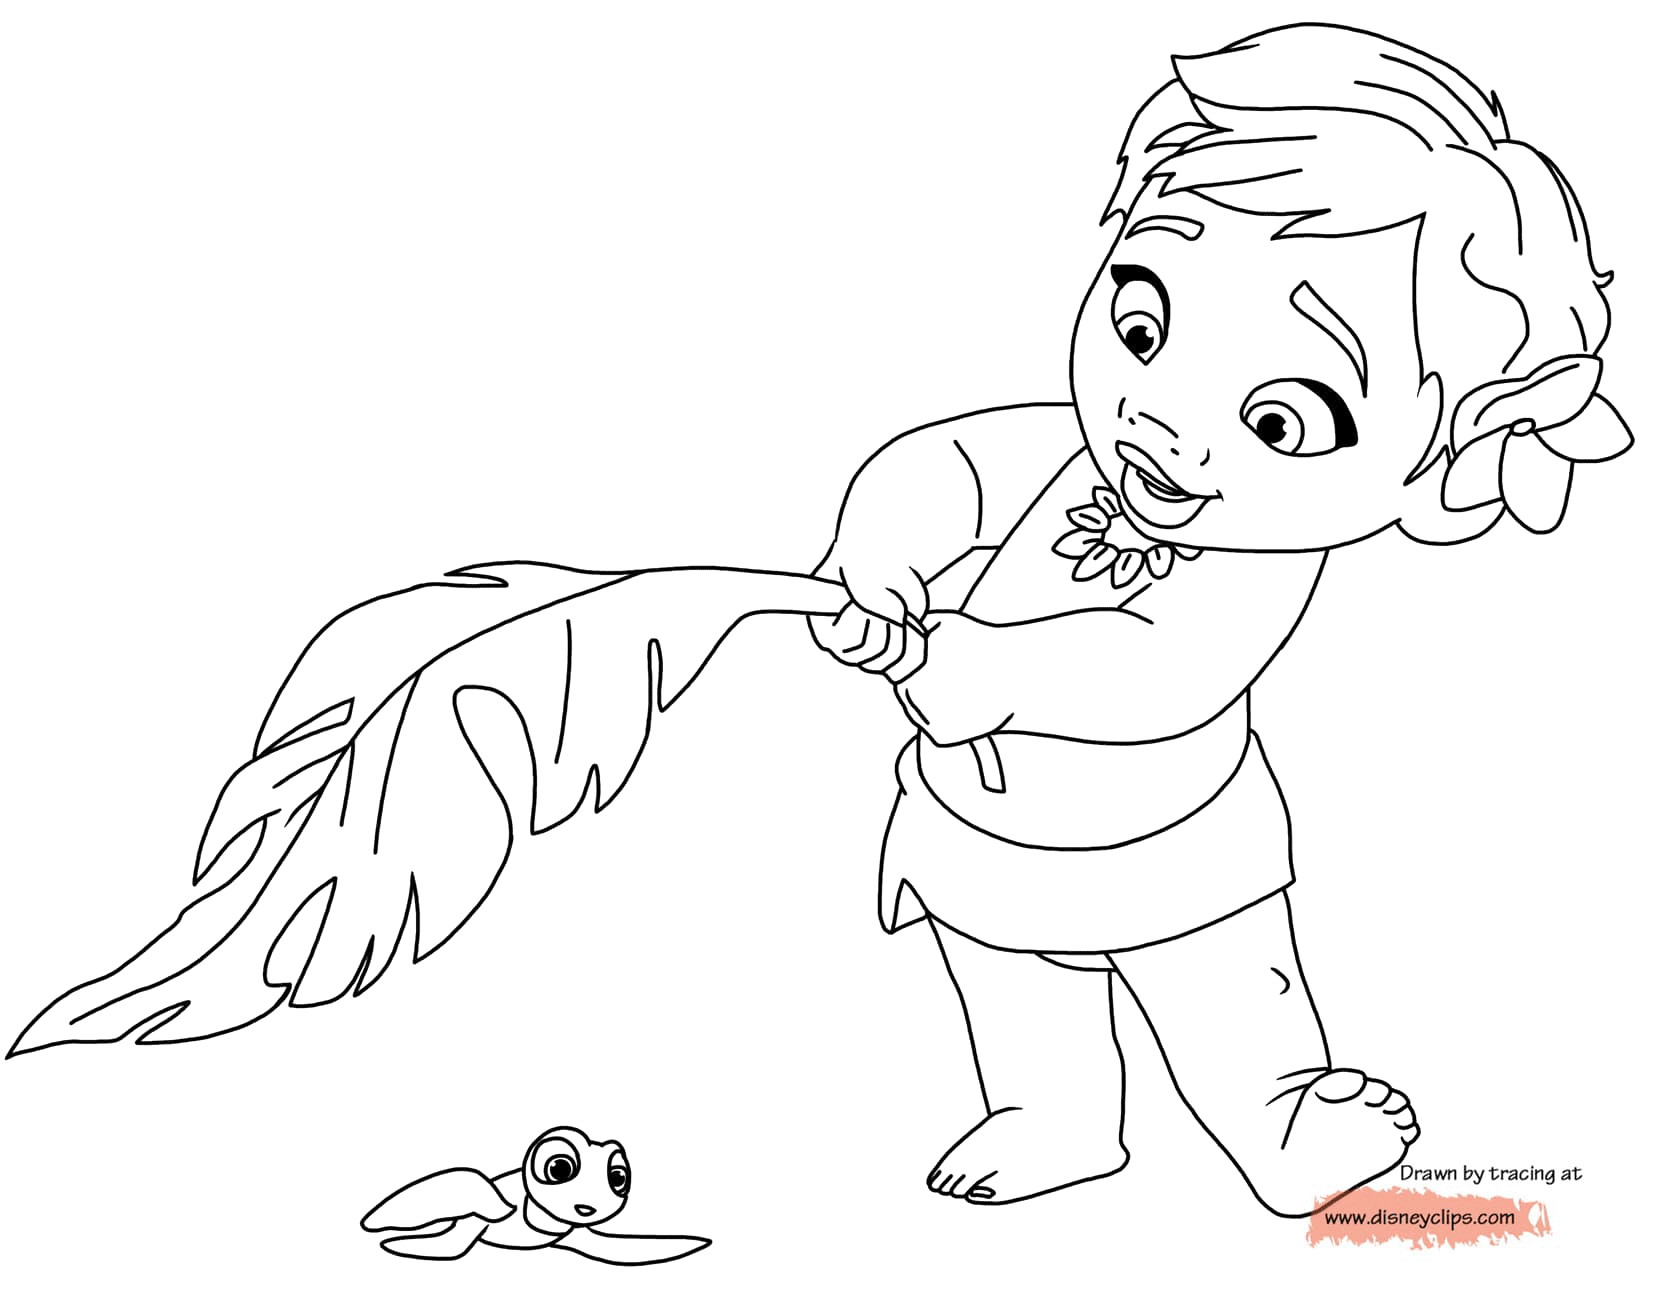 moana-printable-coloring-pages